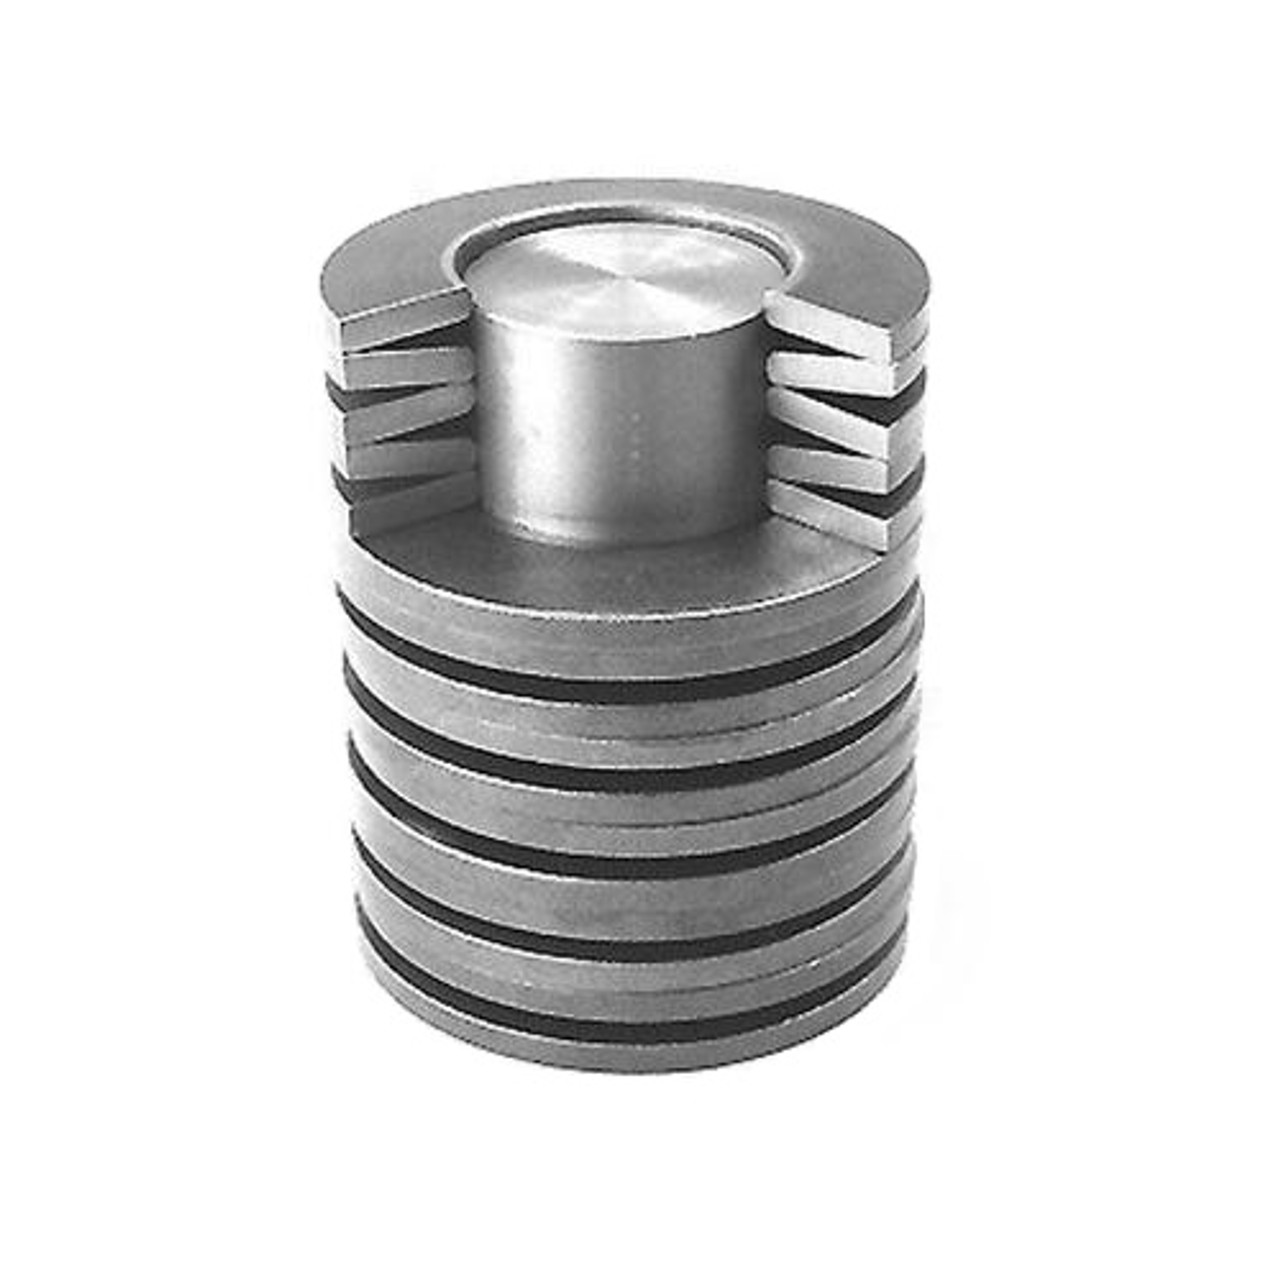 24mm Disc Spring (DIN 2093) Conical Washer  DS024.4-045-02